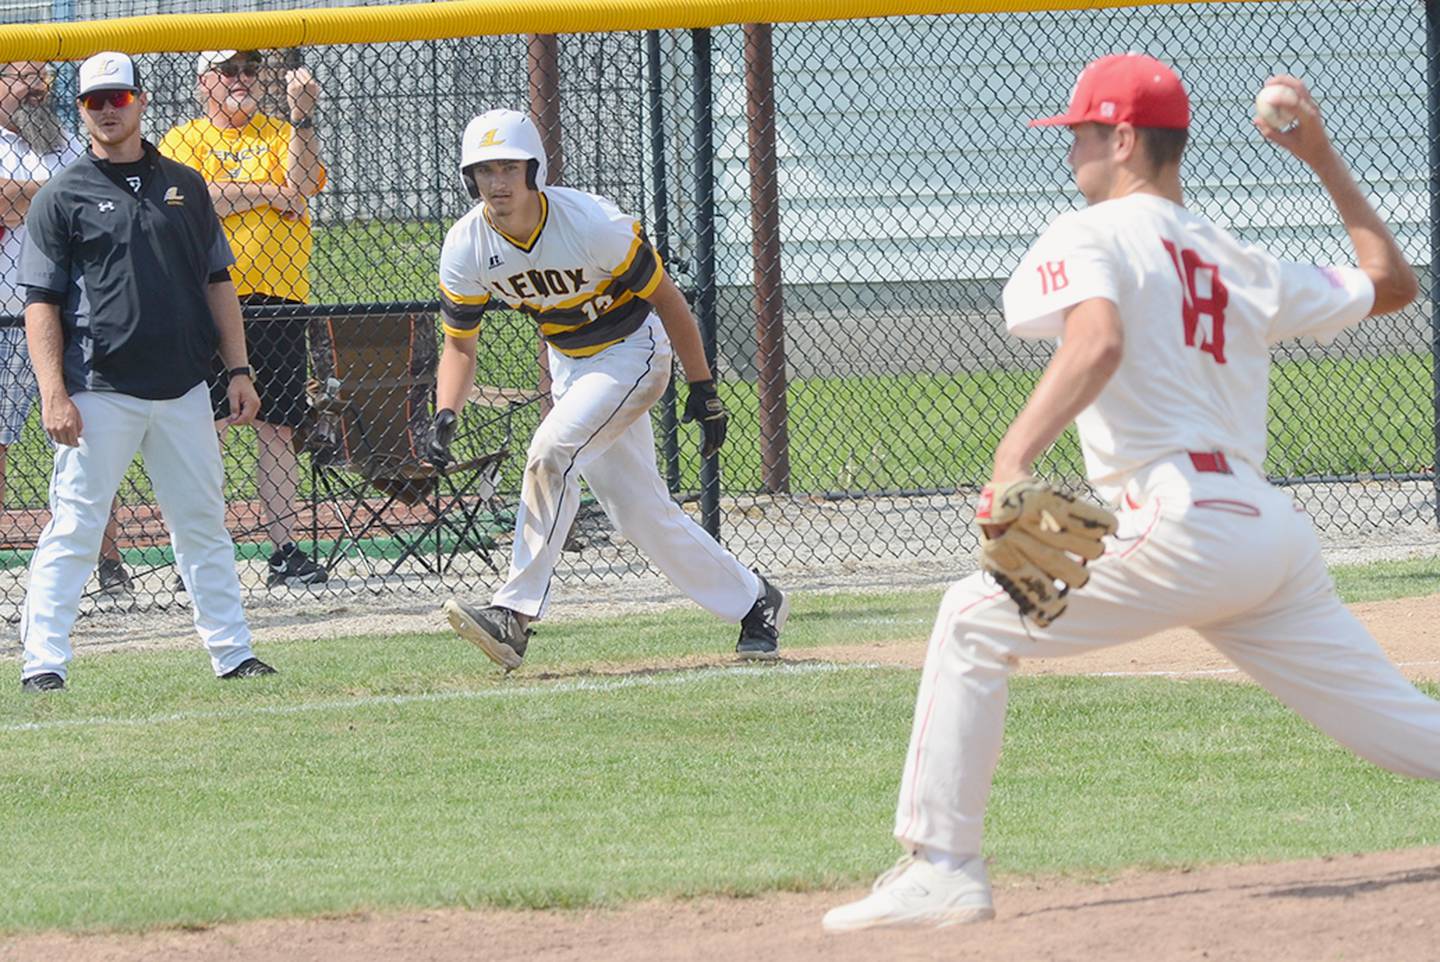 Brody Brokaw of Lenox takes a lead off third base in front of head coach Trevor Luther during Saturday's district tournament win. Moments later Brokaw scampered home on a passed ball for the final run of the 10-0 victory.